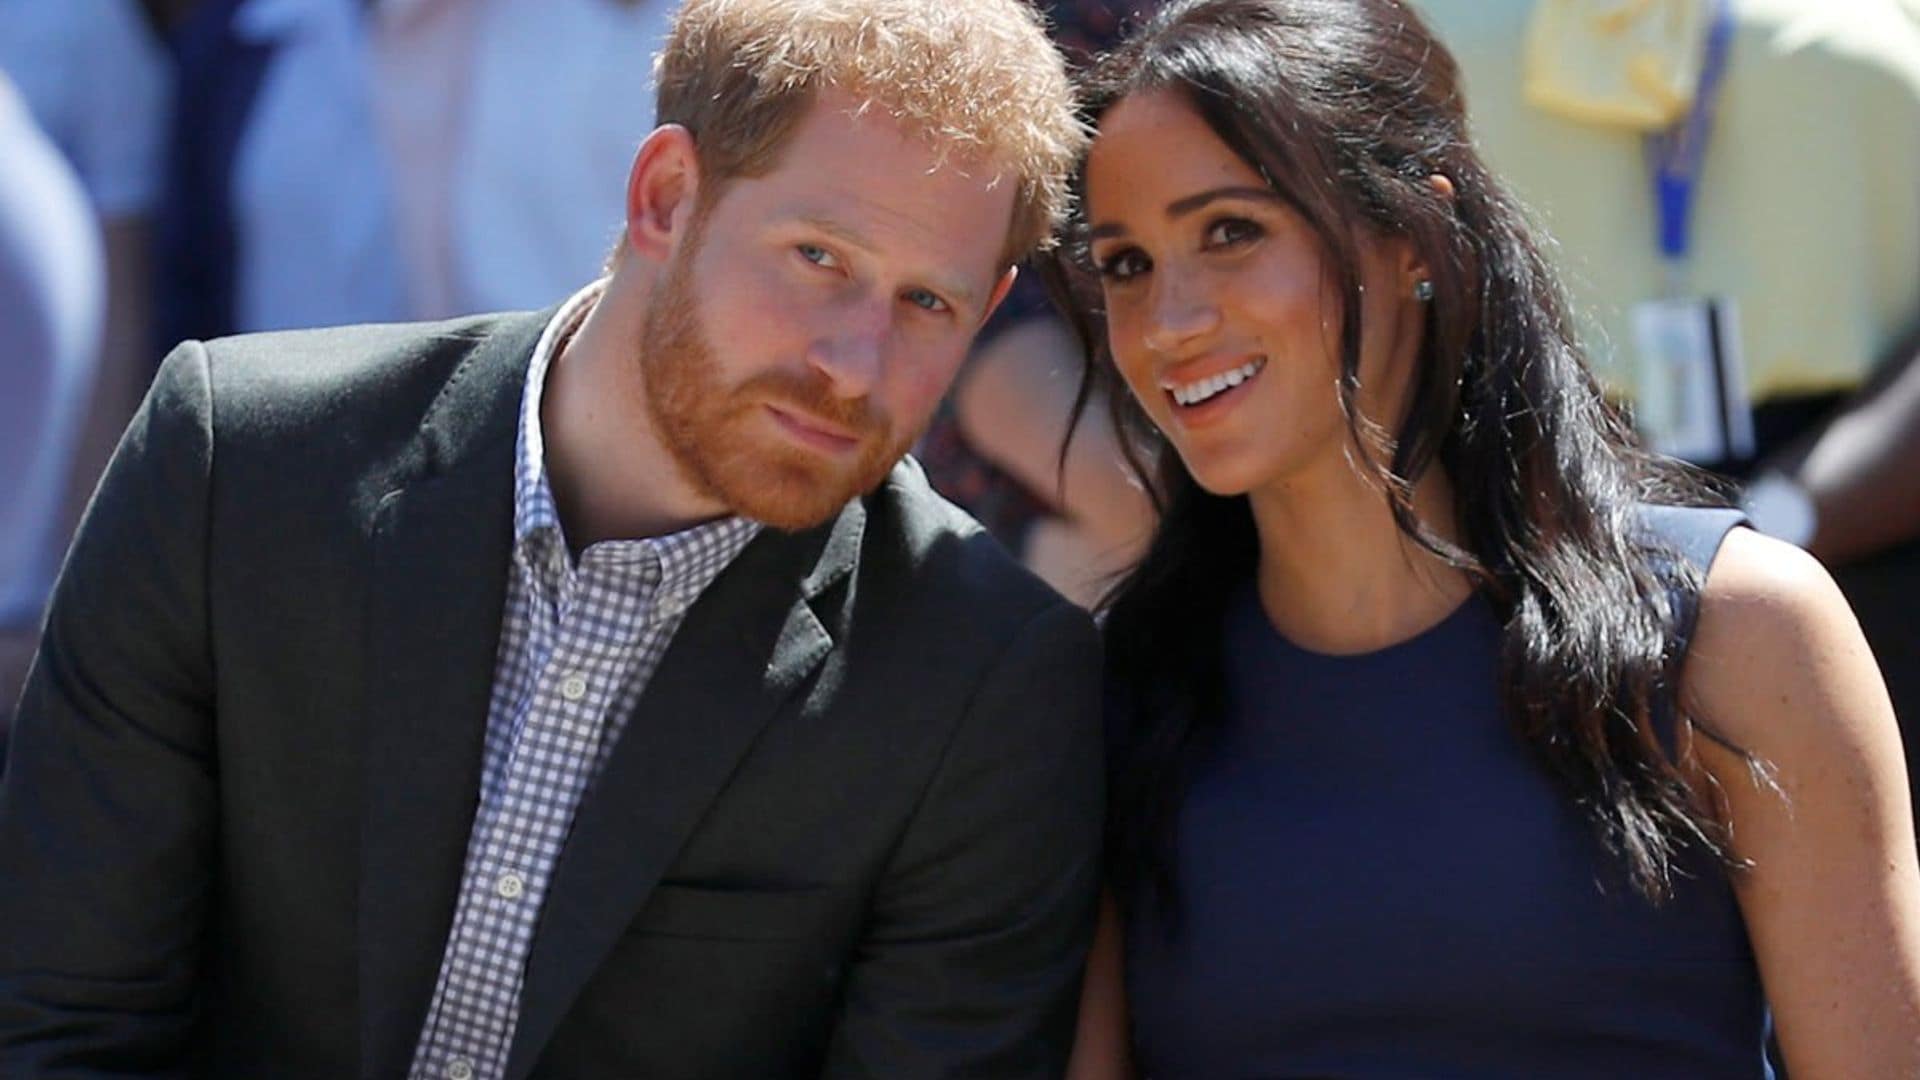 What Meghan and Harry thought about the palace’s ‘recollections may vary’ statement: Report